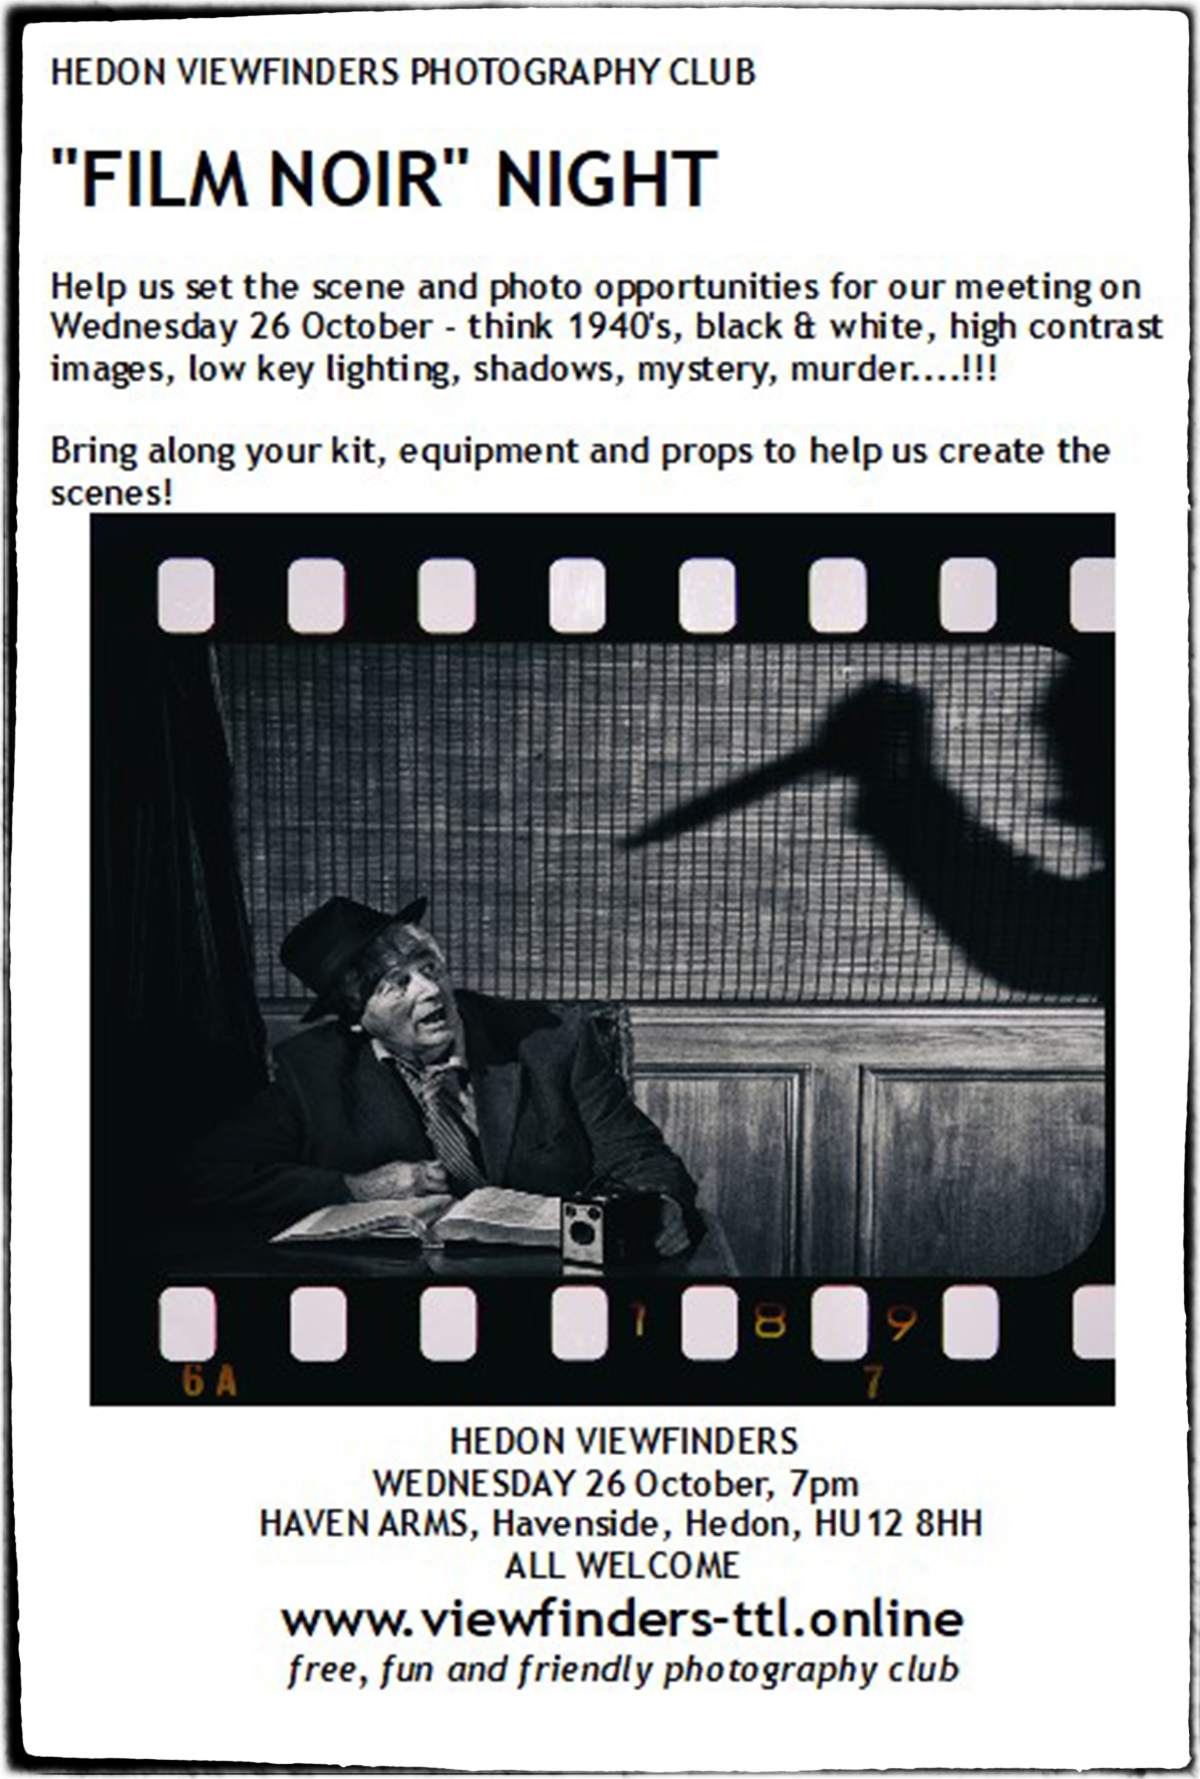 Film Noir Photography Night at Hedon Viewfinders